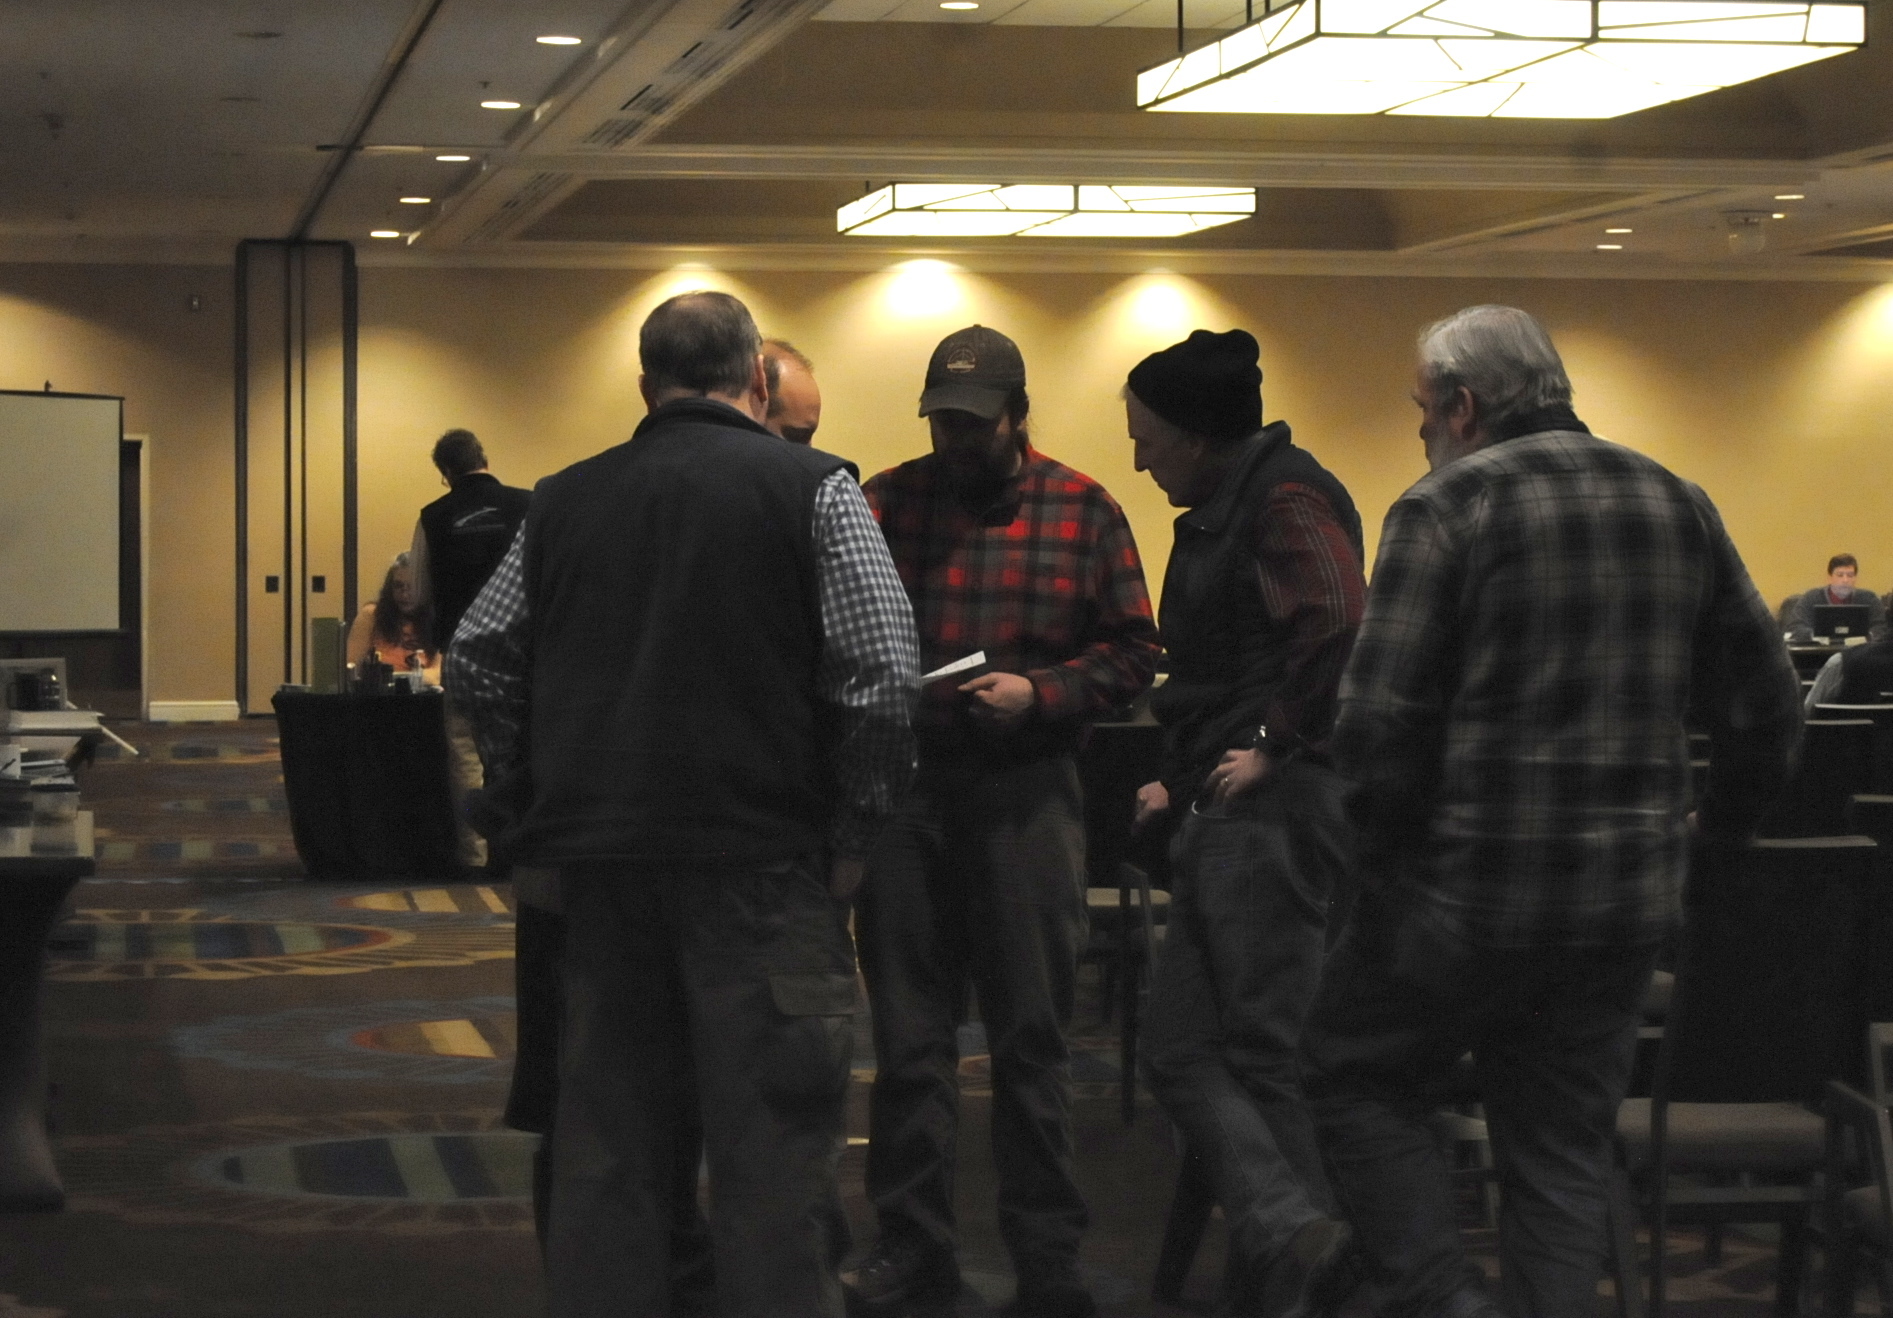 A group of commercial east side setnetters gather to discuss proposals at the Upper Cook Inlet Board of Fisheries meeting on Monday, Feb. 27, 2017 in Anchorage, Alaska. (Elizabeth Earl/Peninsula Clarion)